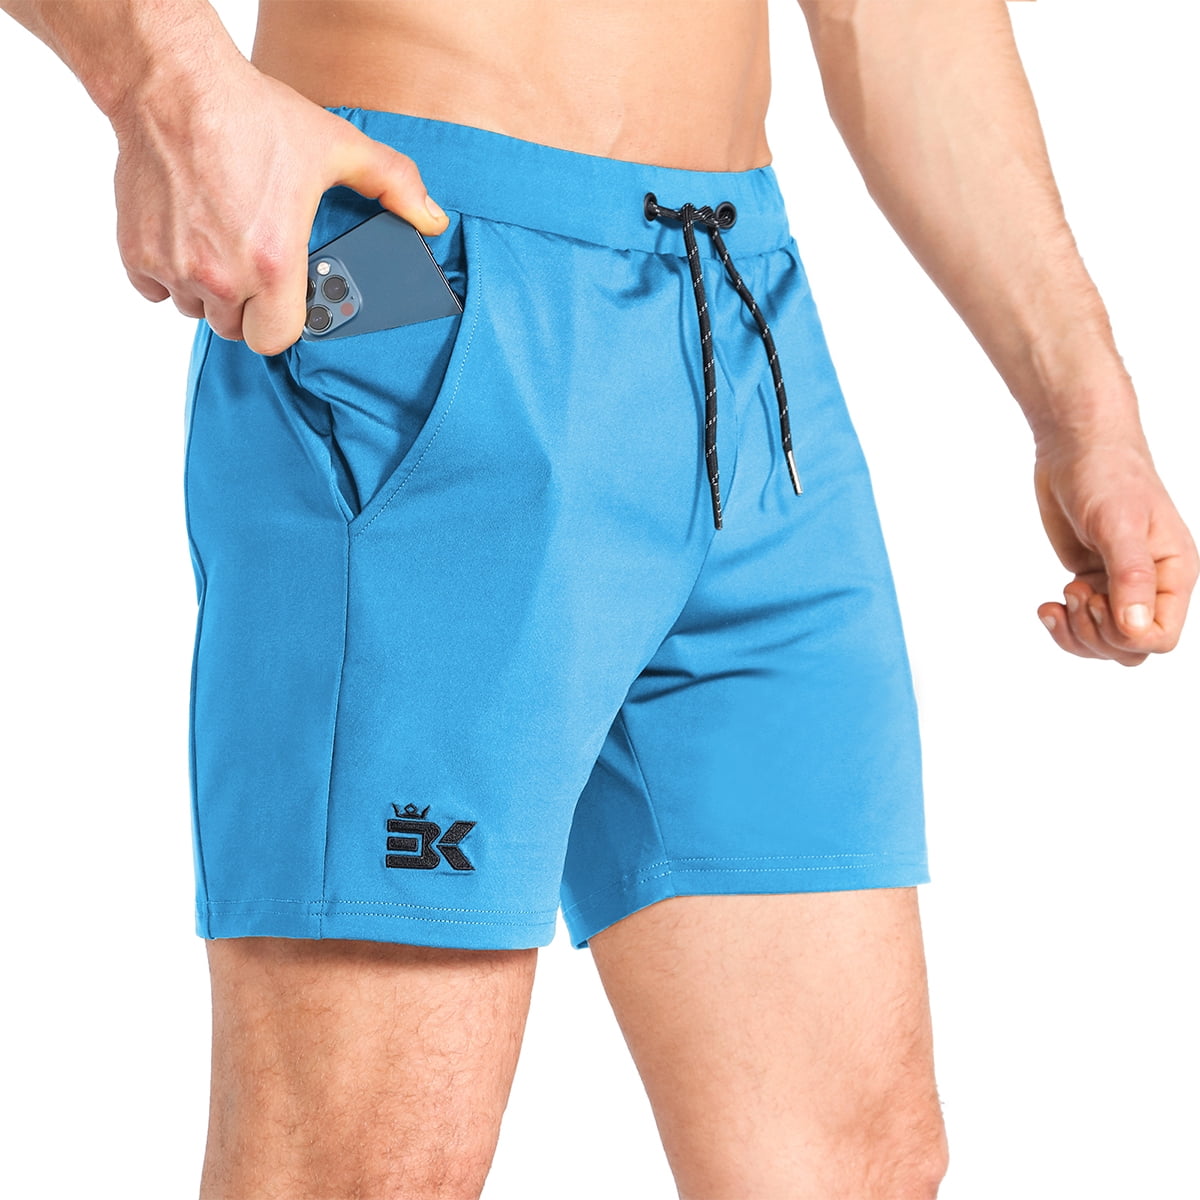 BROKIG Men's Lightweight Gym Shorts,Bodybuilding Quick Dry Running Athletic Workout Shorts for Men with Pockets 